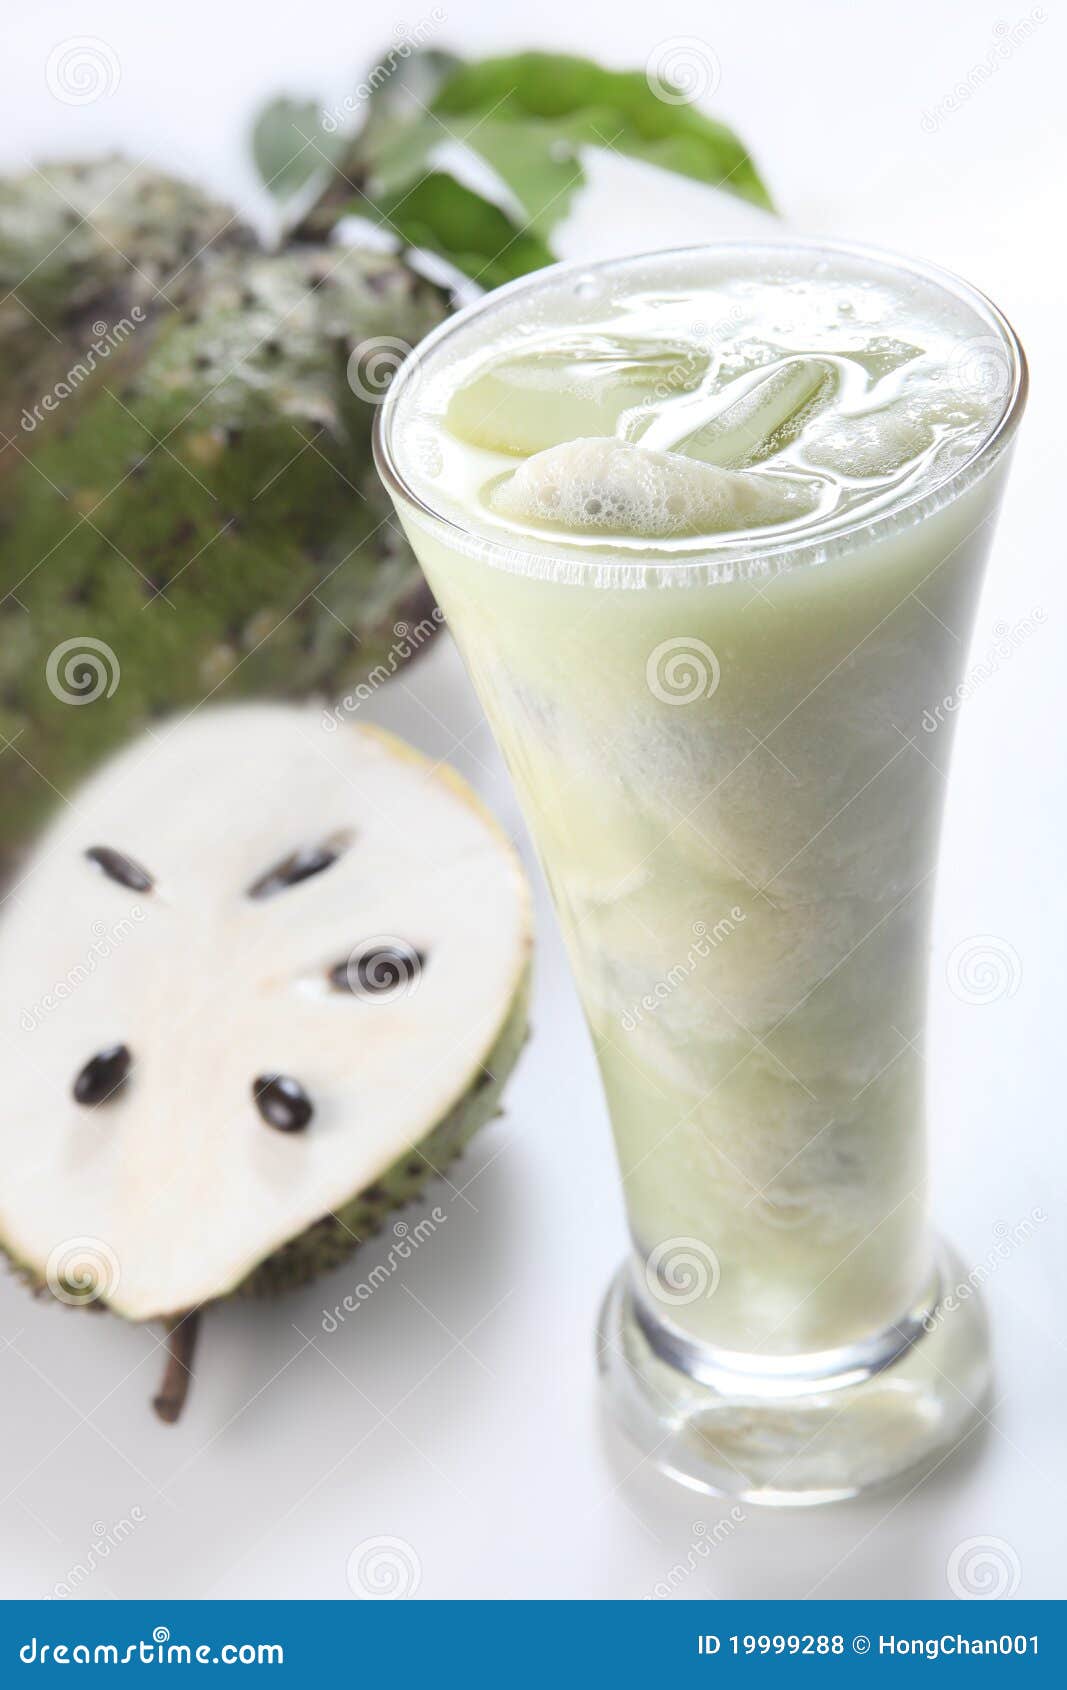 Glass Juice Soursop Photos Free Royalty Free Stock Photos From Dreamstime